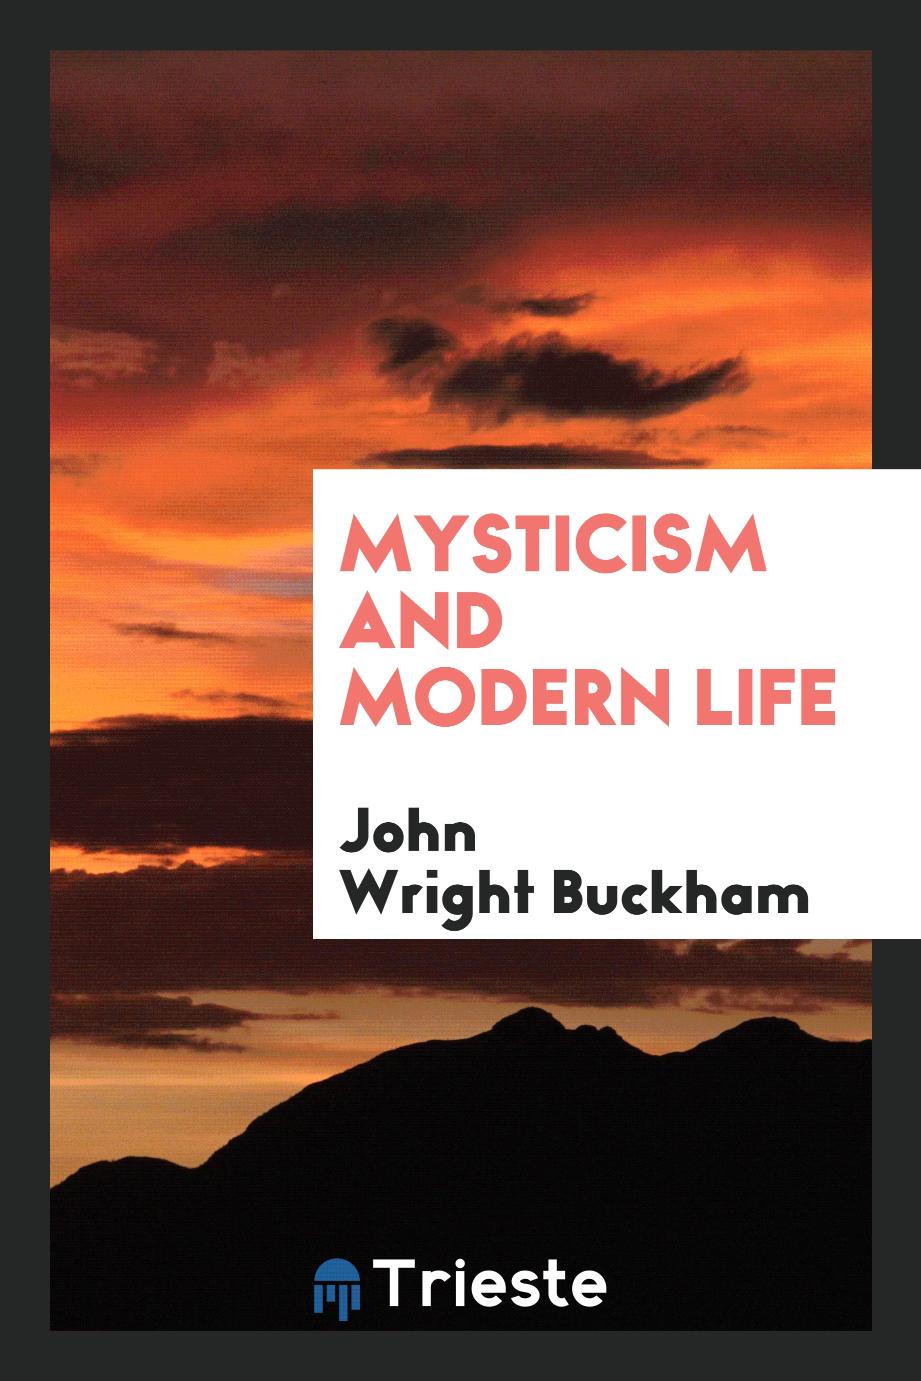 Mysticism and modern life